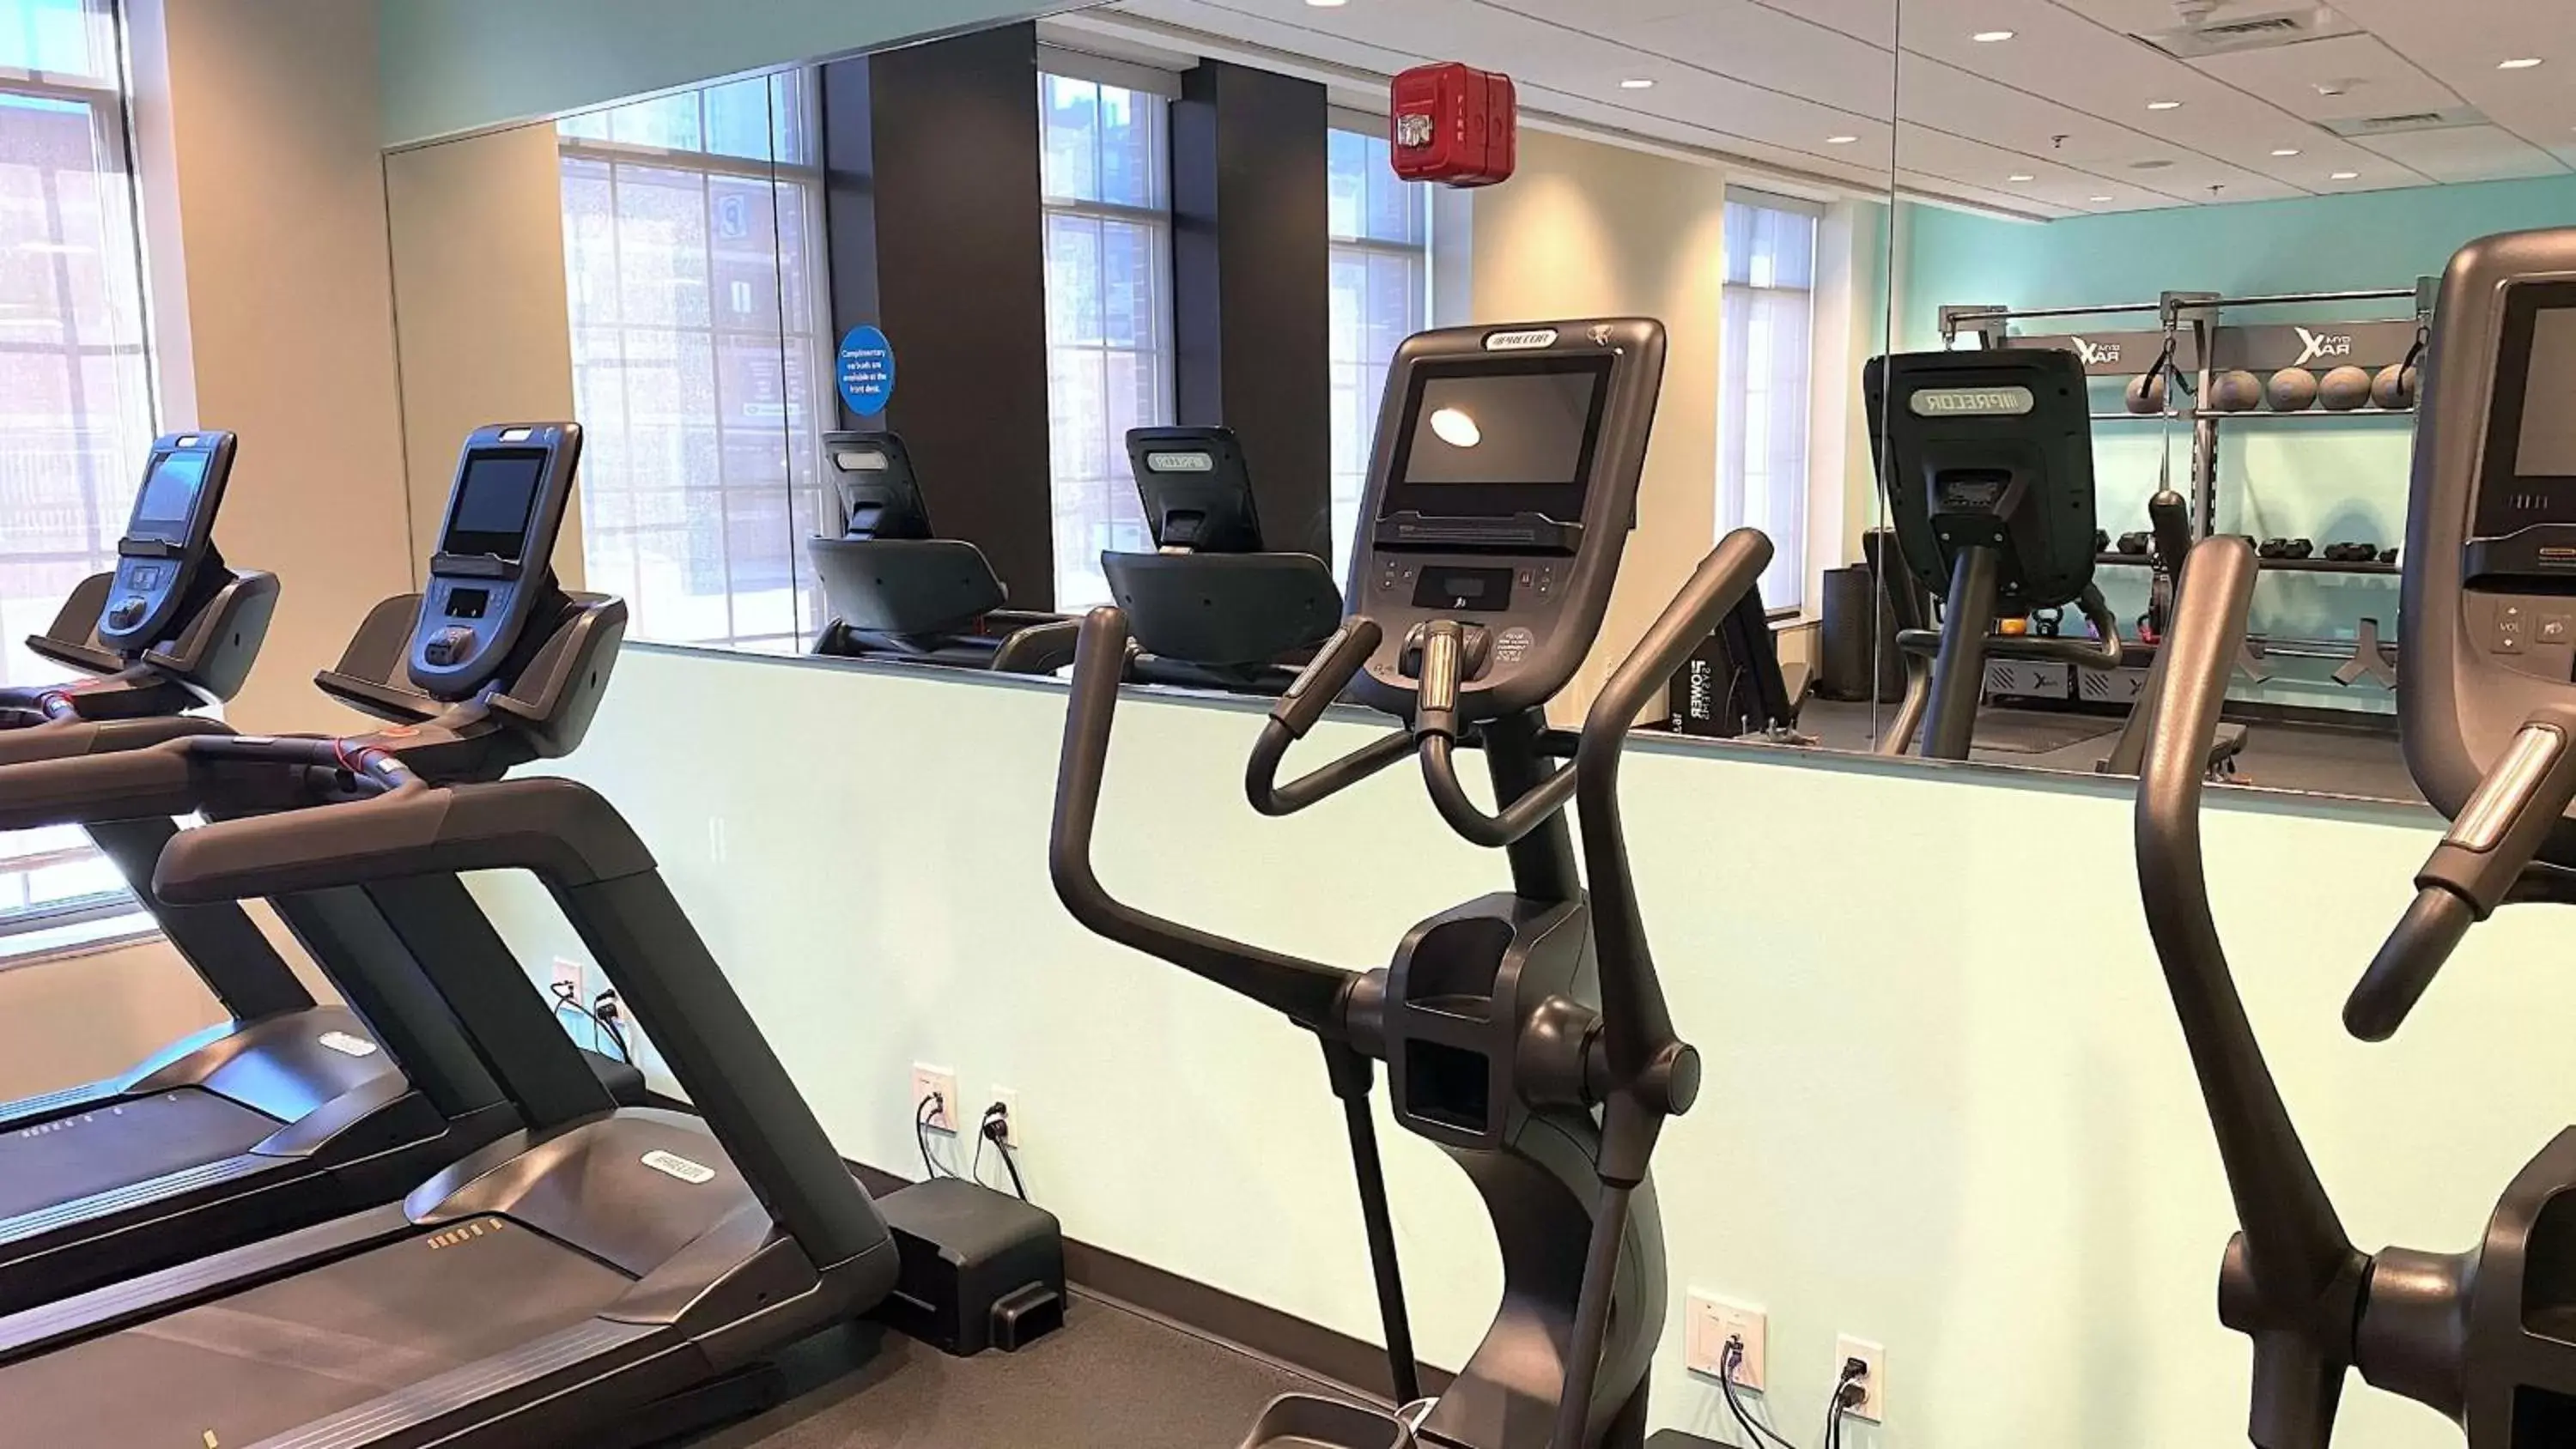 Fitness centre/facilities, Fitness Center/Facilities in Tru By Hilton Baltimore Harbor East